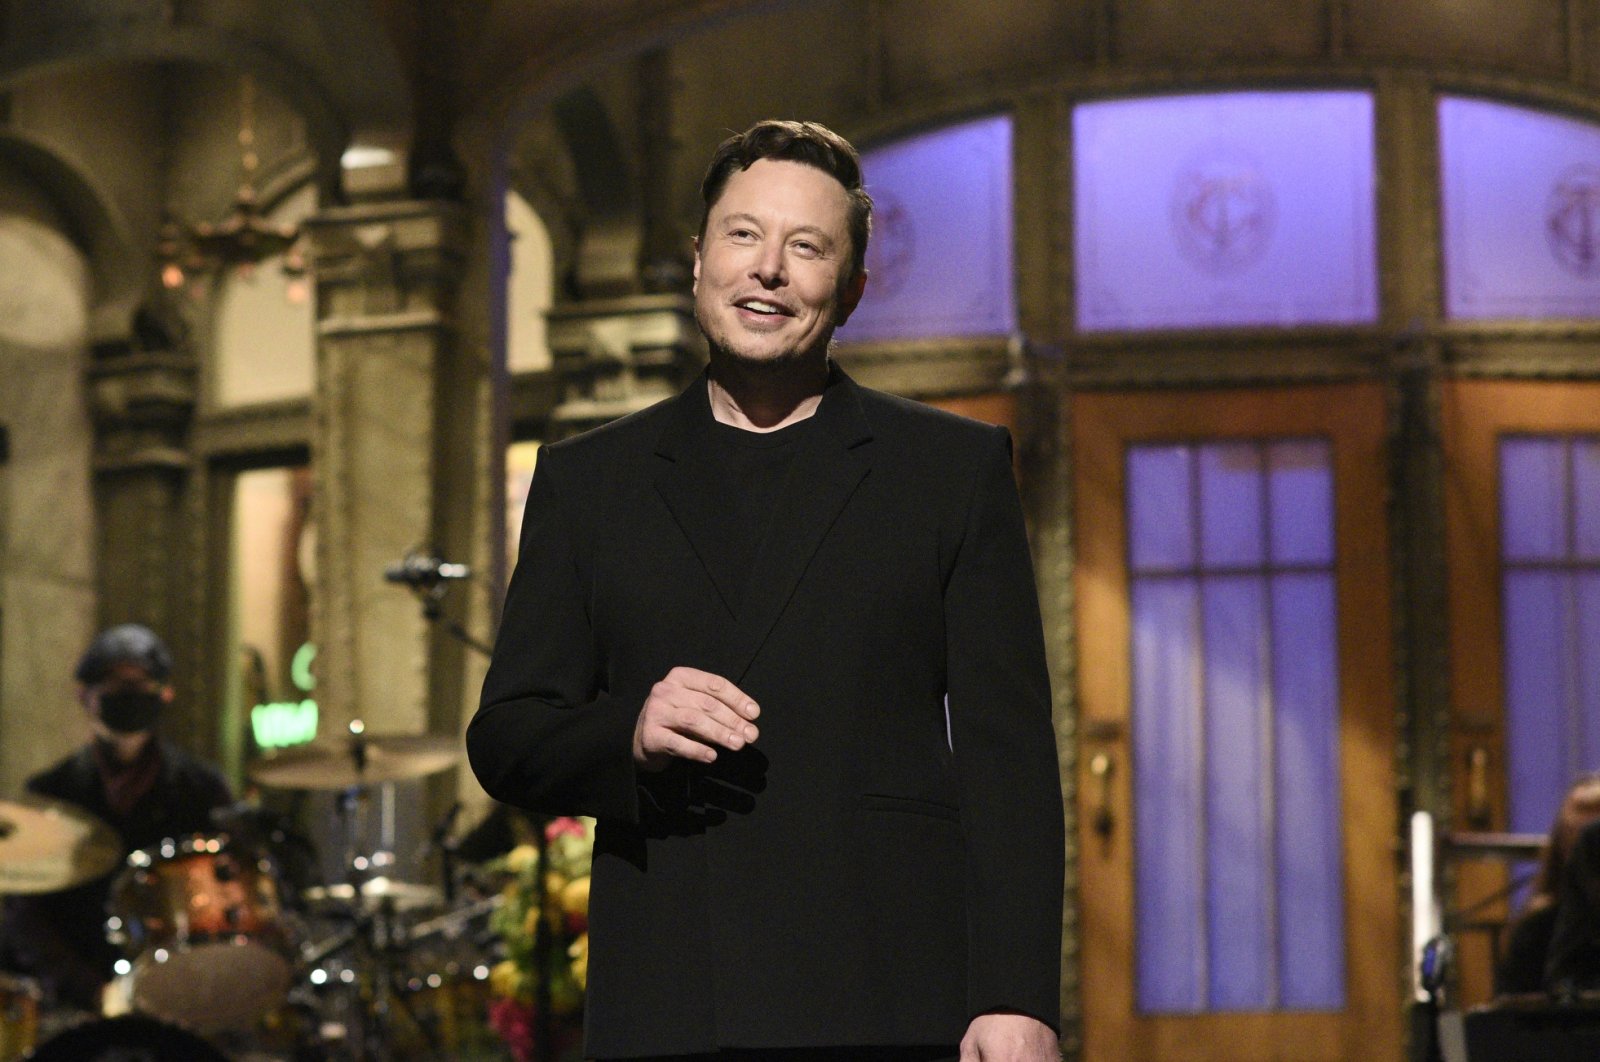 This image released by NBC shows host Elon Musk delivering his opening monologue on "Saturday Night Live" in New York, the U.S., May 8, 2021. (Will Heath/NBC via AP)